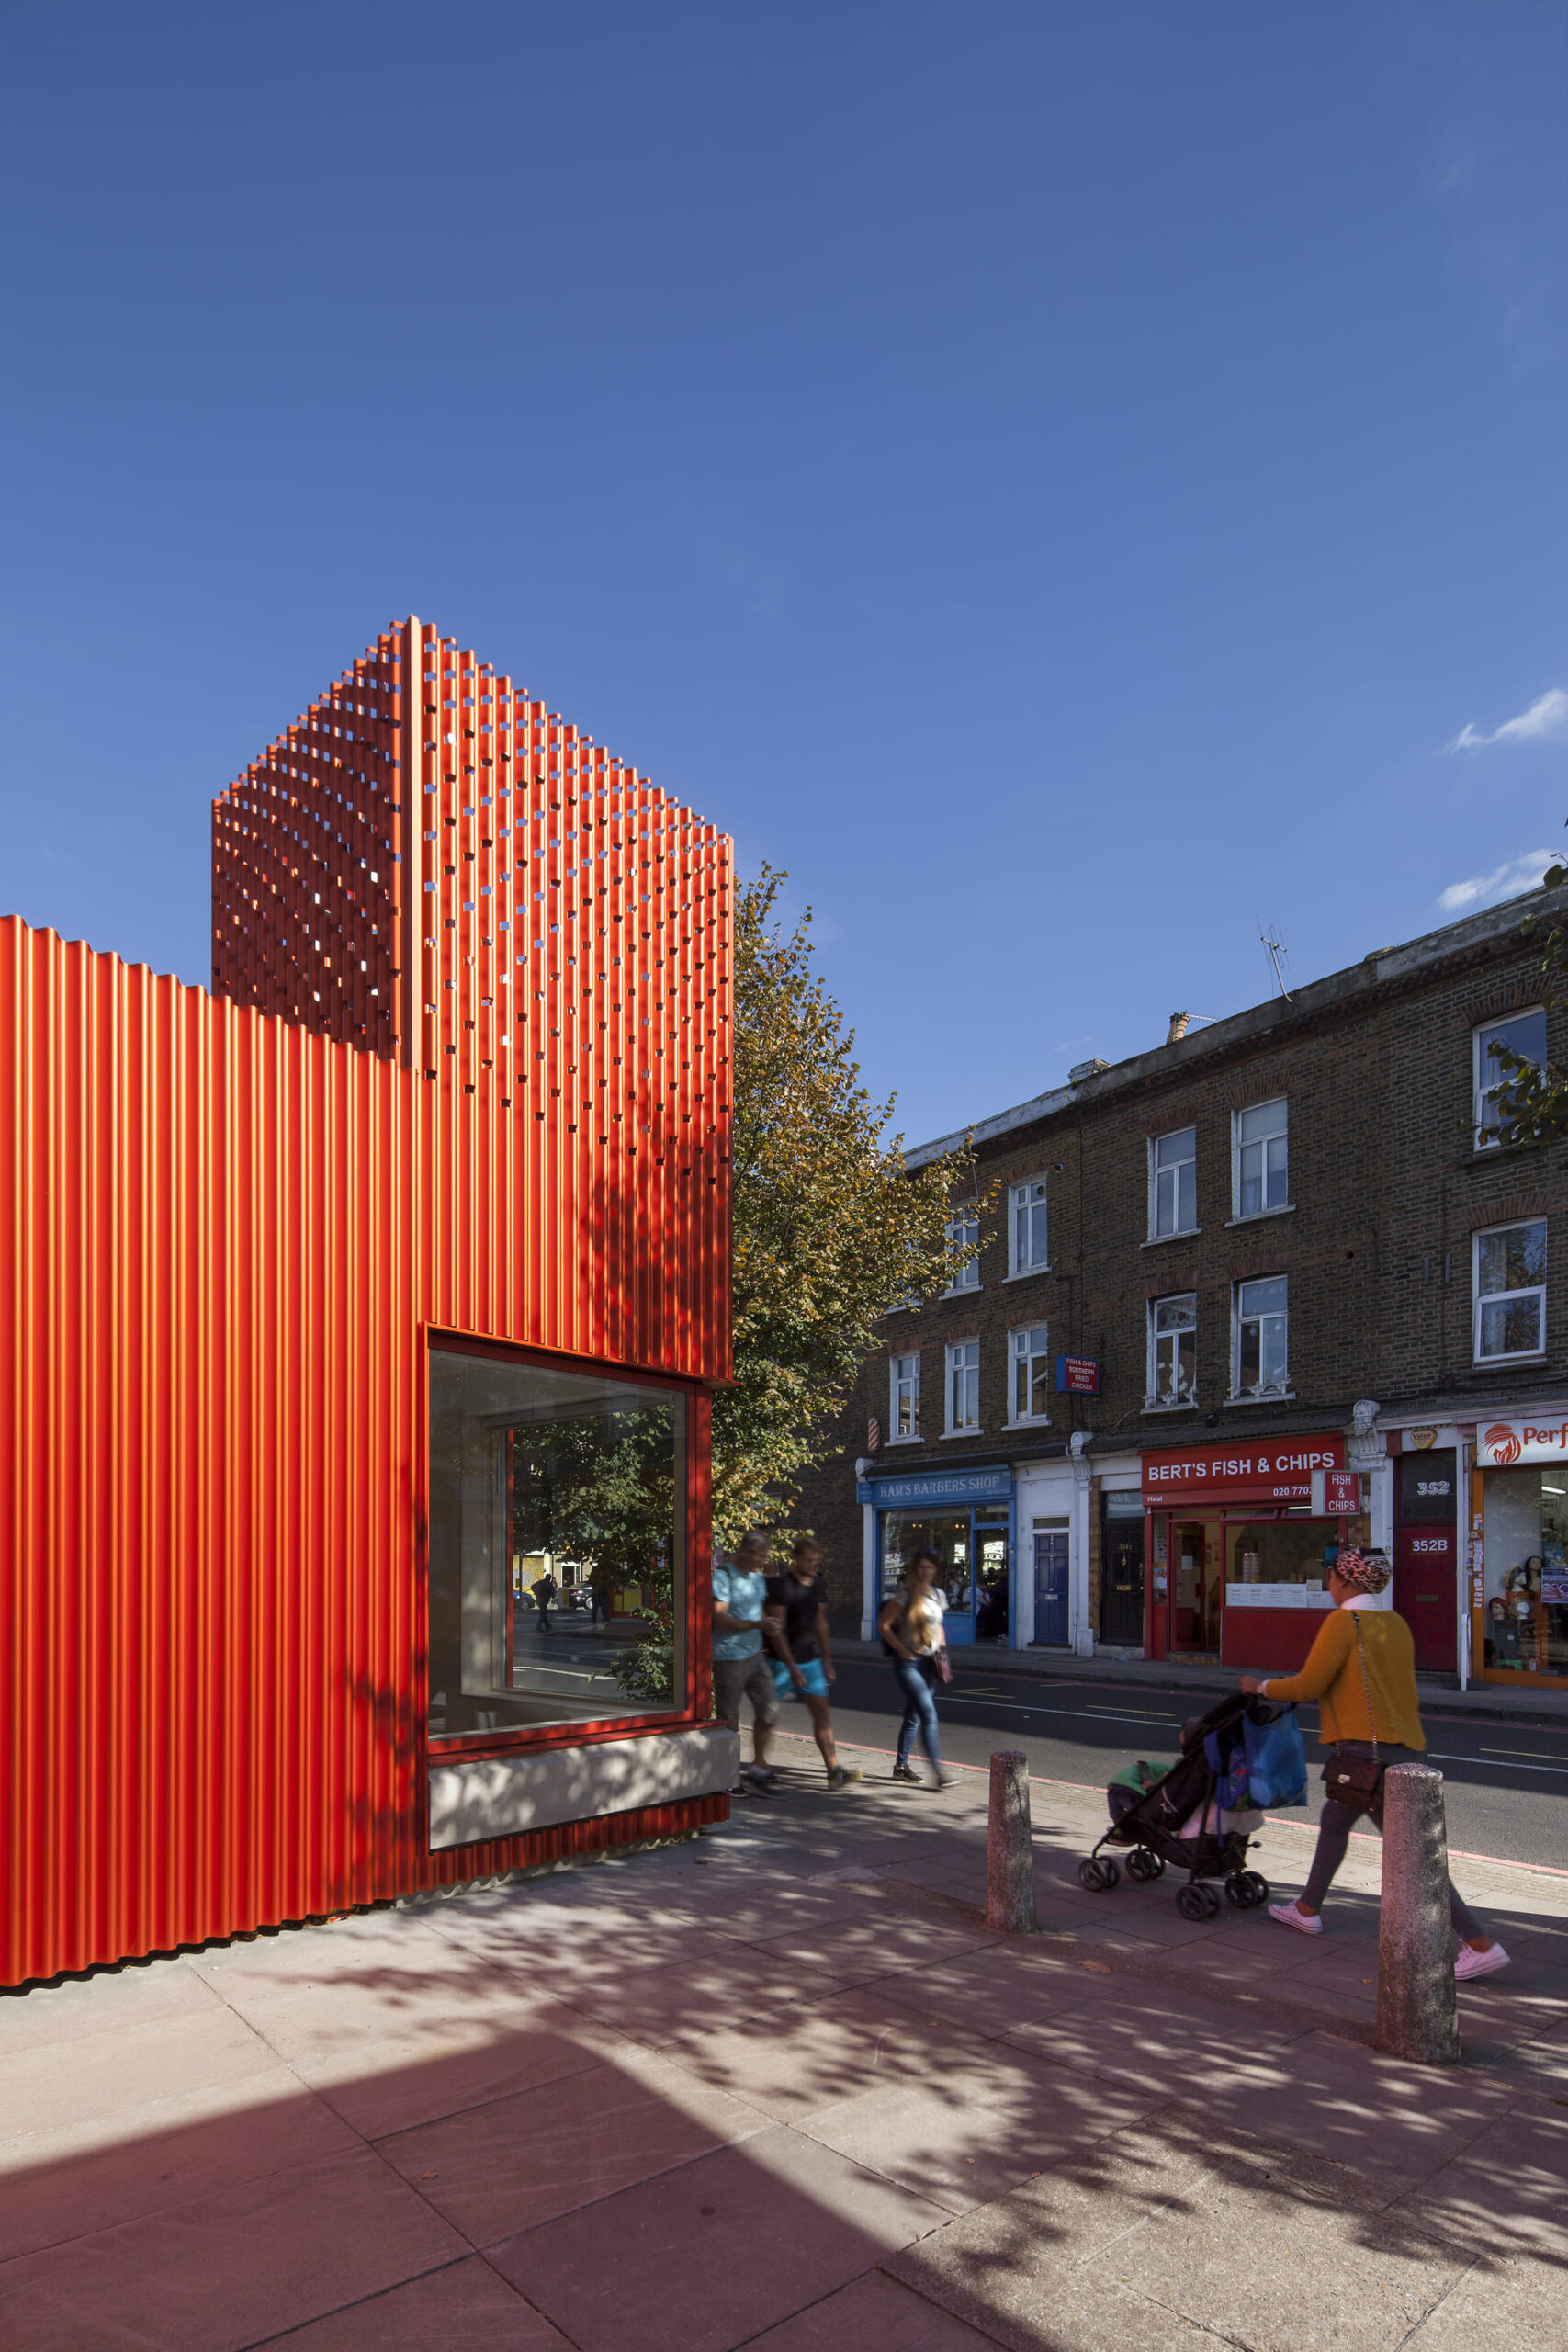 East Street Library in Walworth, London